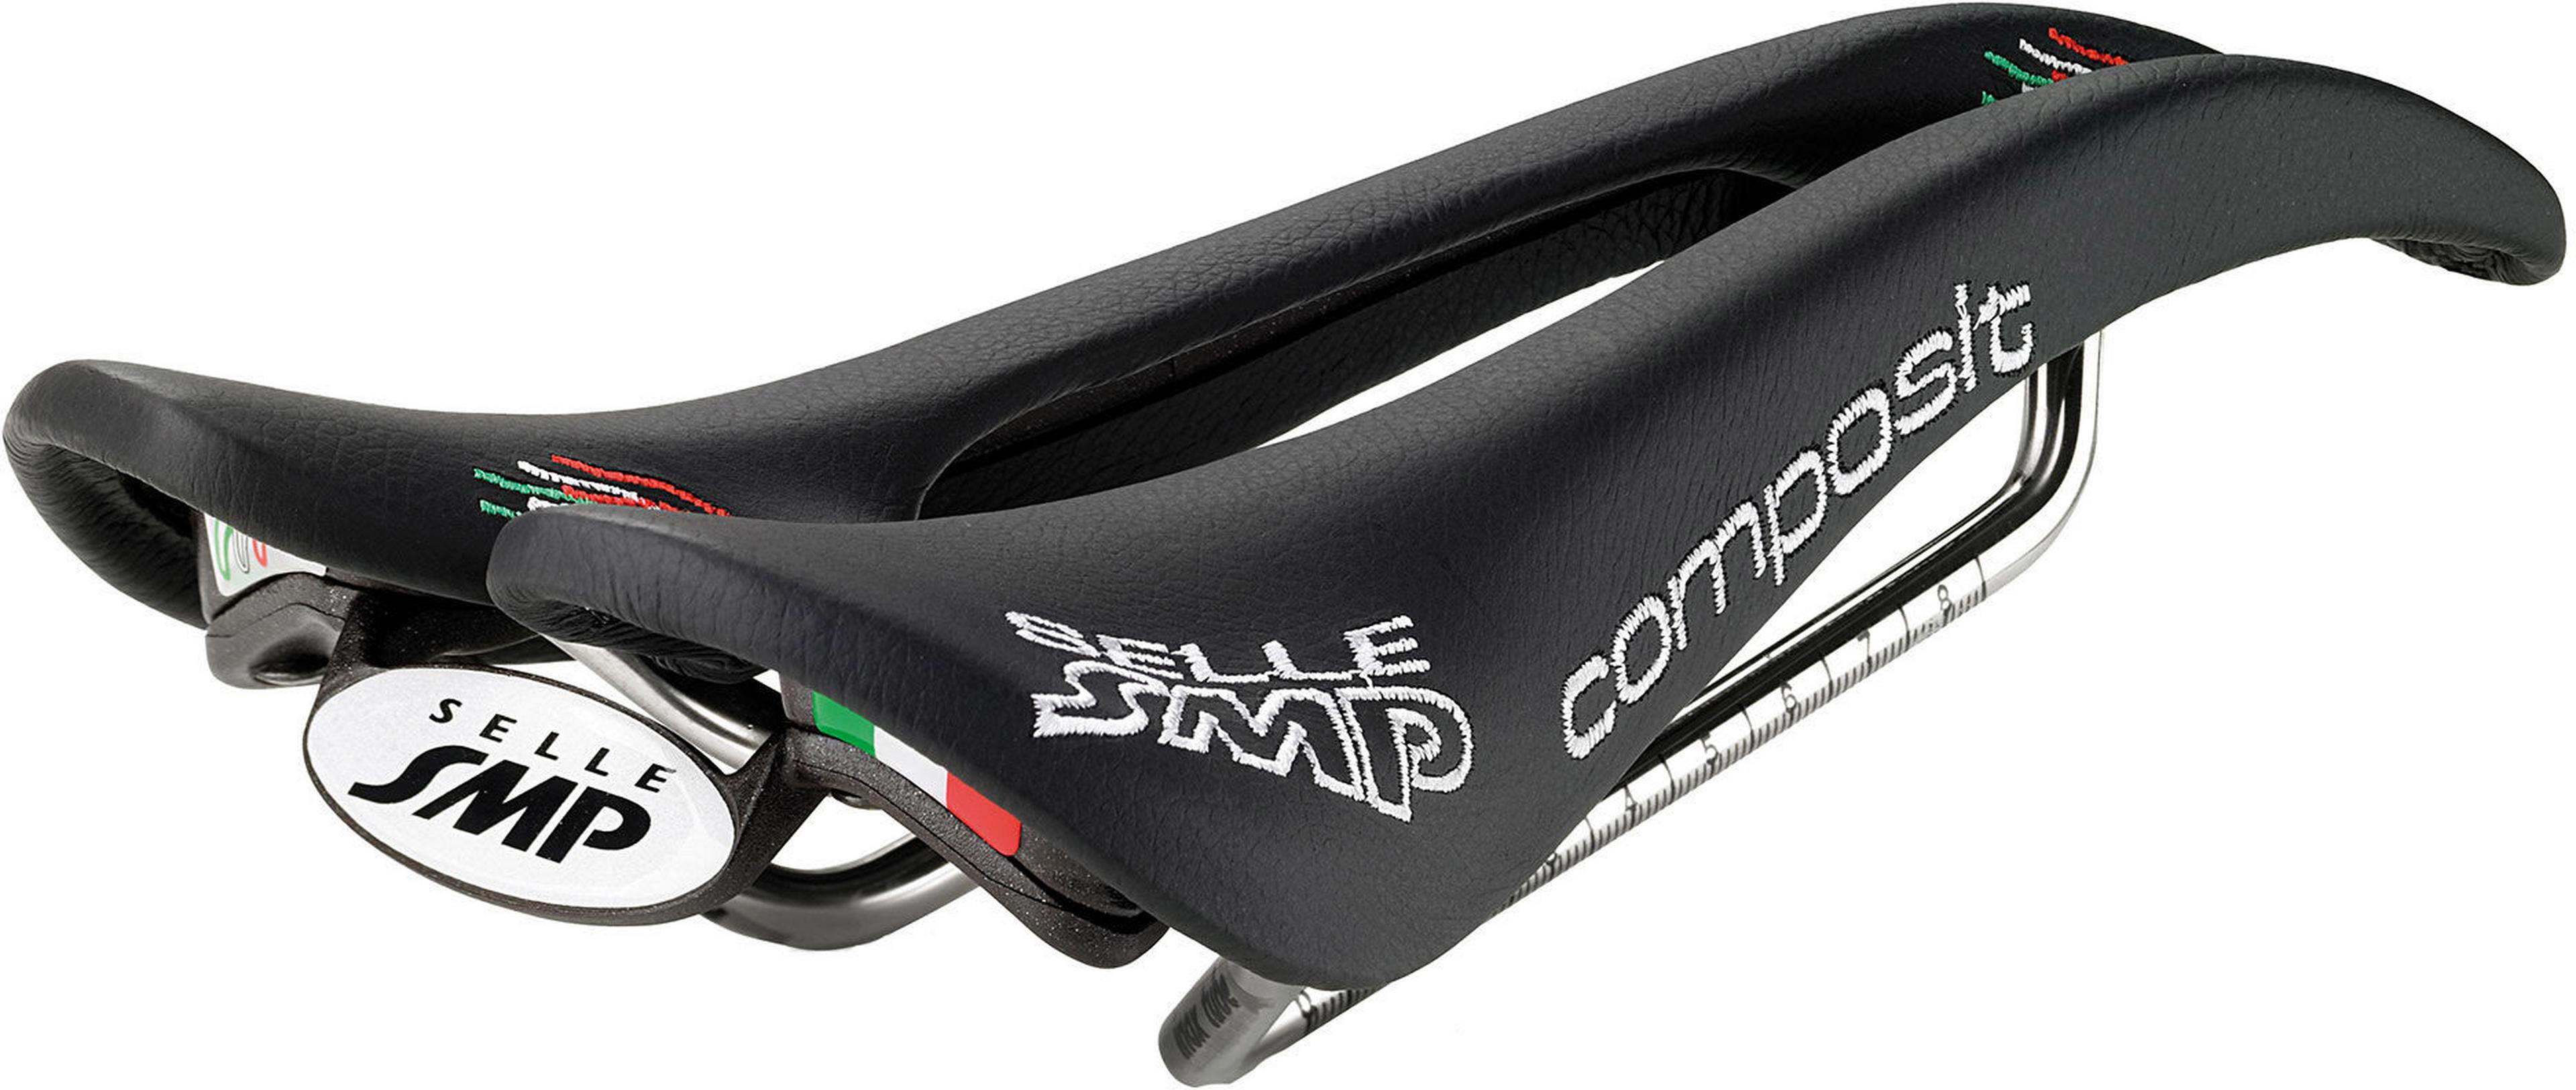 Selle SMP - Composit サドル | Wiggle